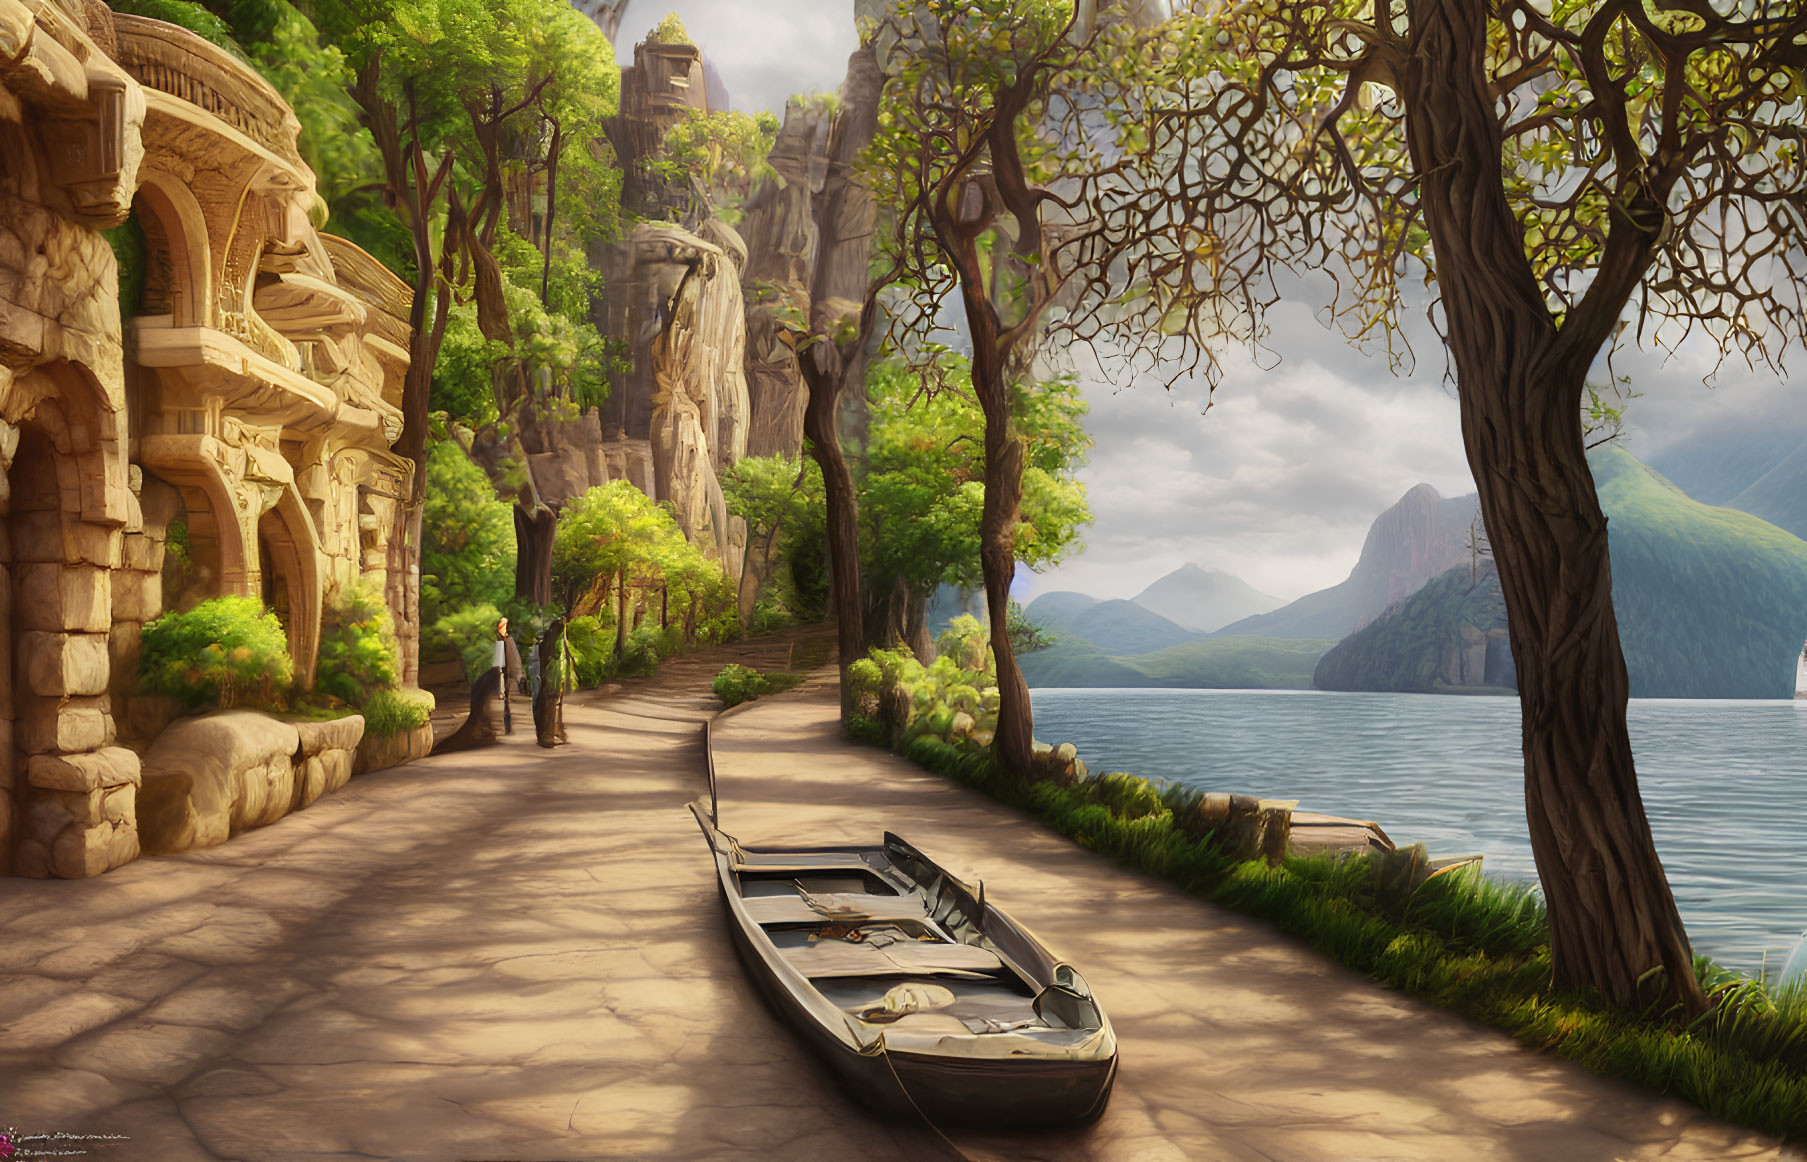 Tranquil lakeside path with boat, ancient trees, and misty mountains